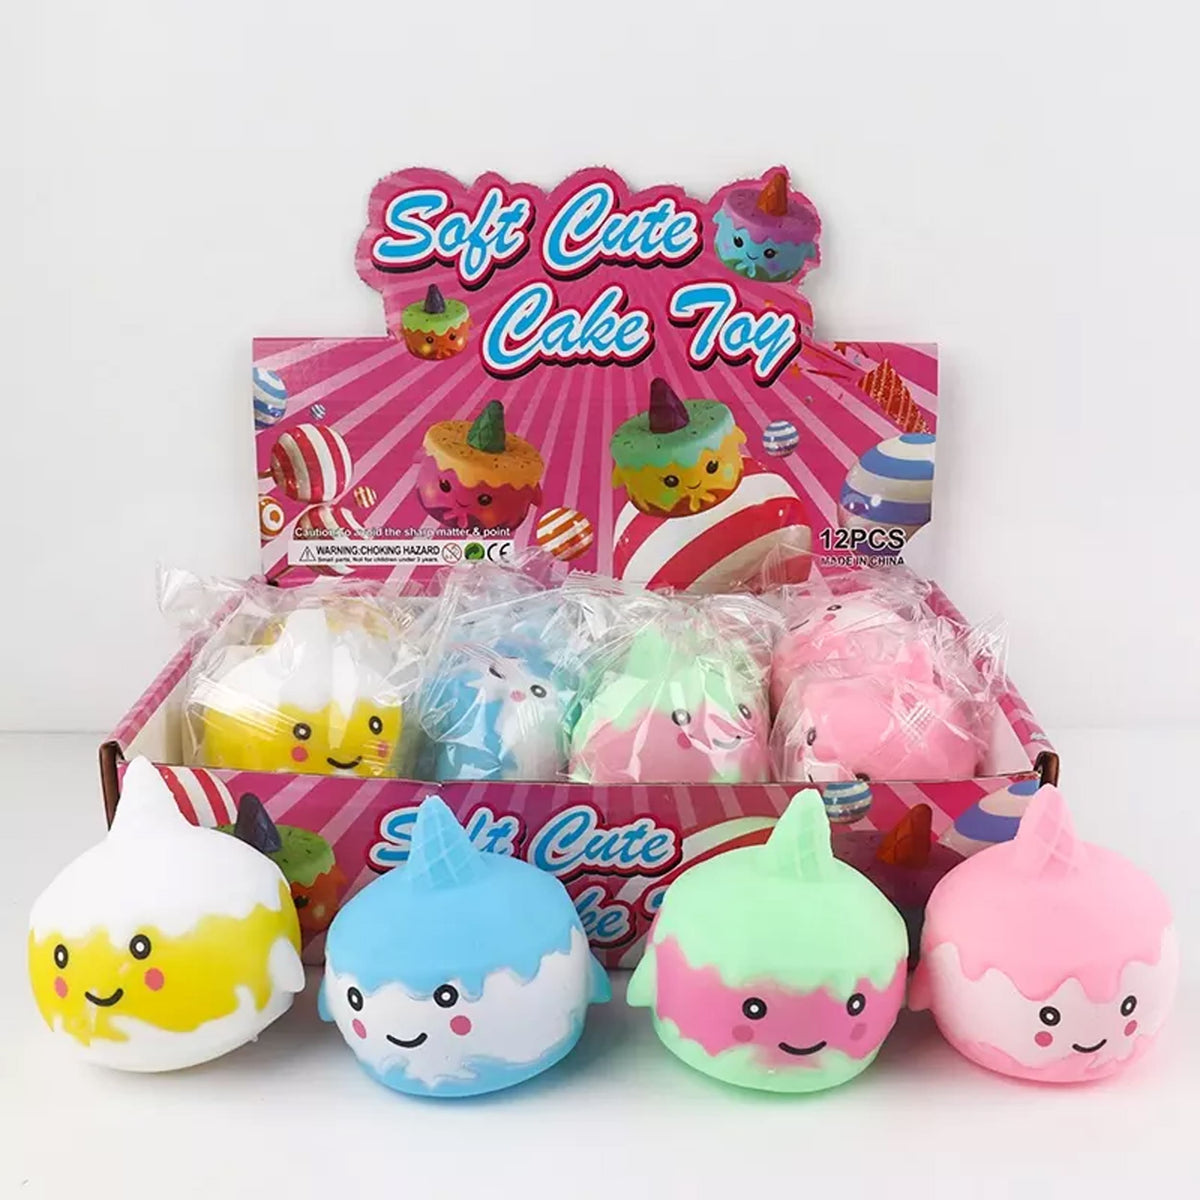 Squishy Cake Toy for Kids - Assorted Cake-Shaped Fidget Toys